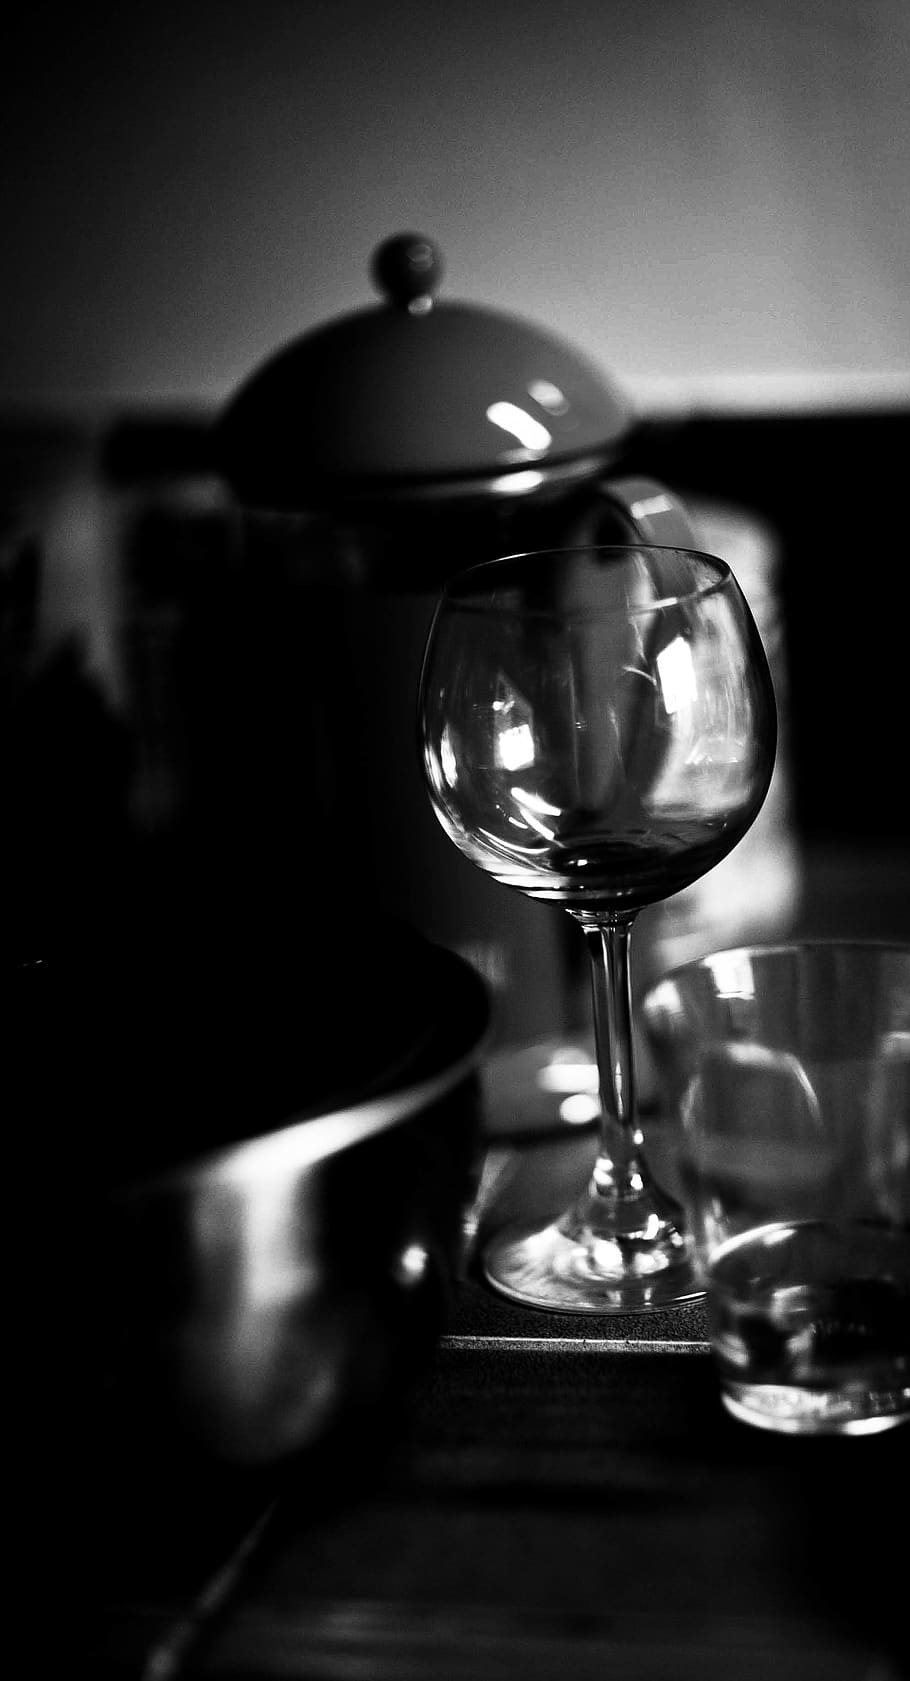 wino, object, black and white, glass, table, indoors, no people